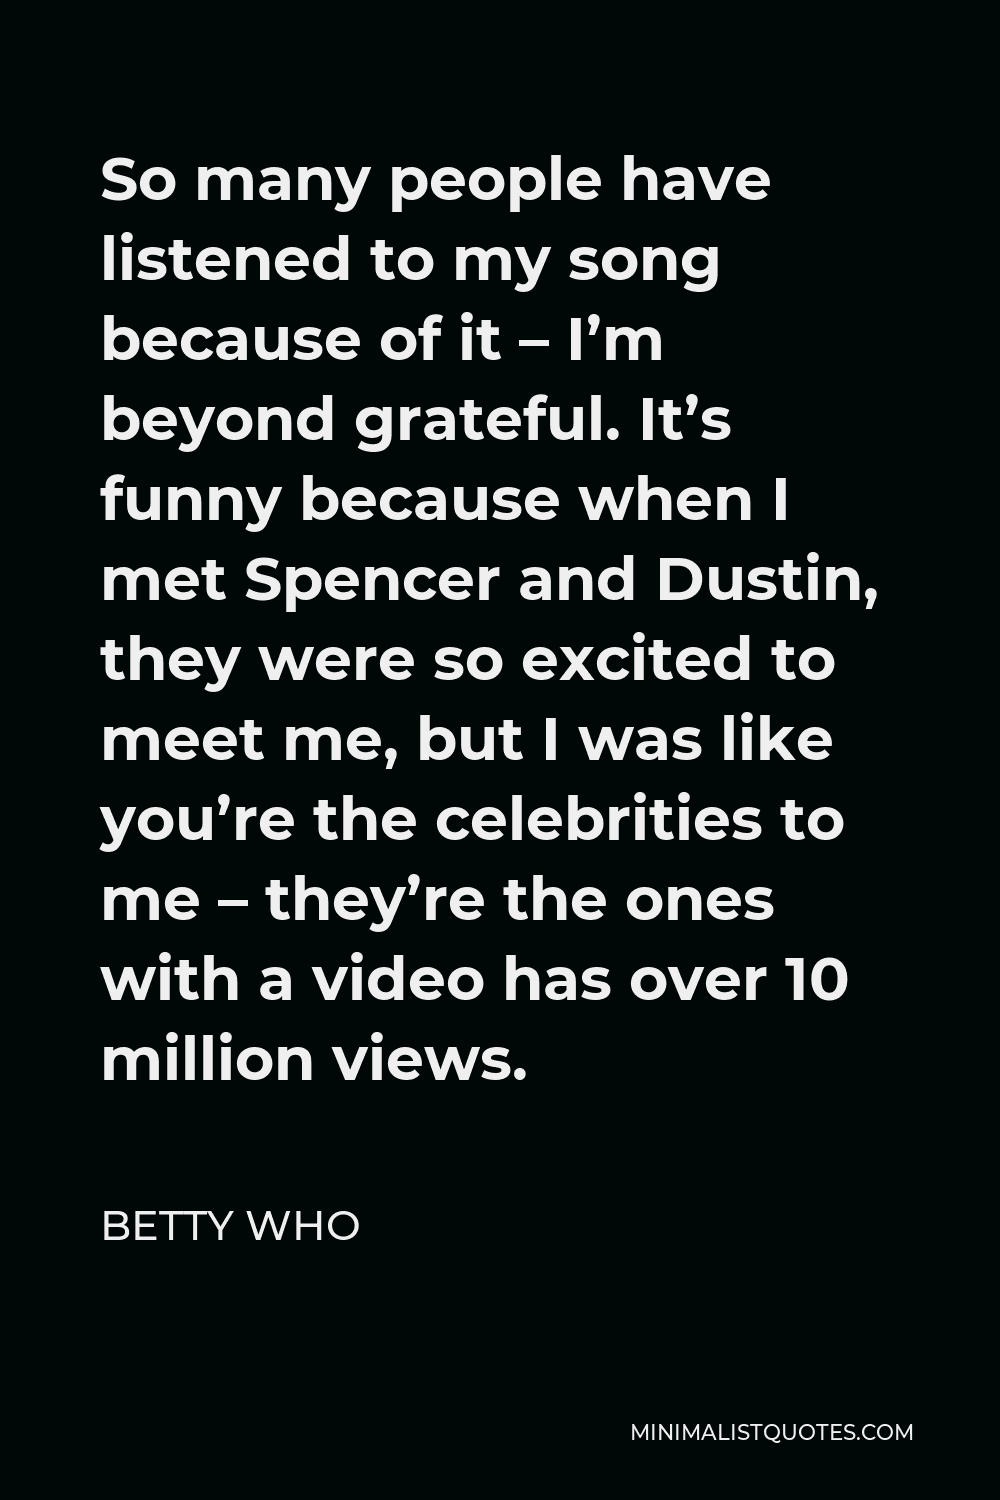 Betty Who Quote - So many people have listened to my song because of it – I’m beyond grateful. It’s funny because when I met Spencer and Dustin, they were so excited to meet me, but I was like you’re the celebrities to me – they’re the ones with a video has over 10 million views.